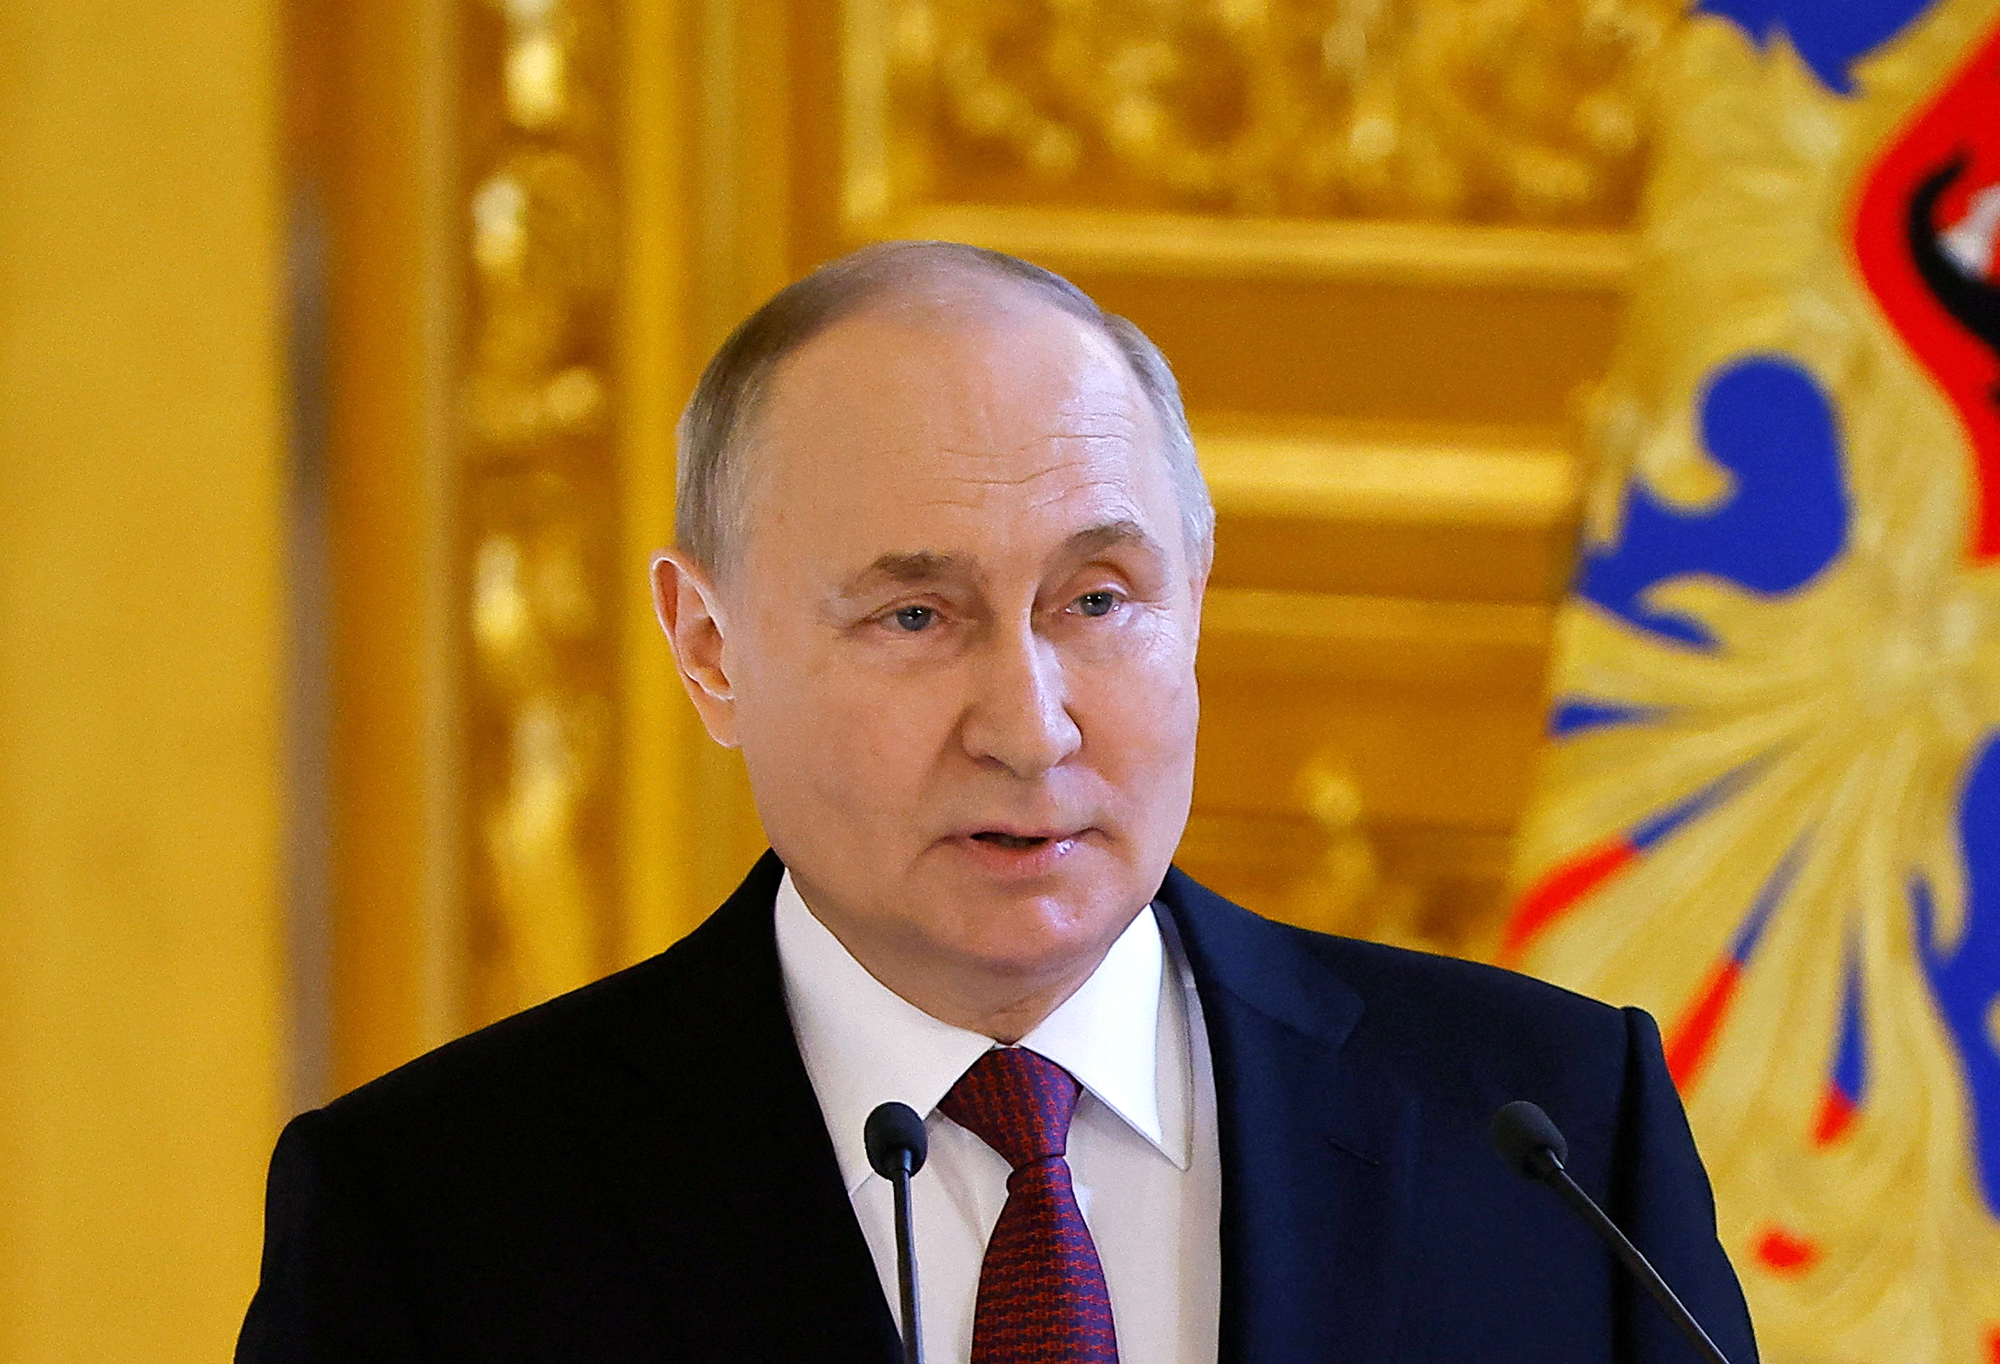 Russian President Vladimir Putin speaks during a meeting in Moscow on March 20.